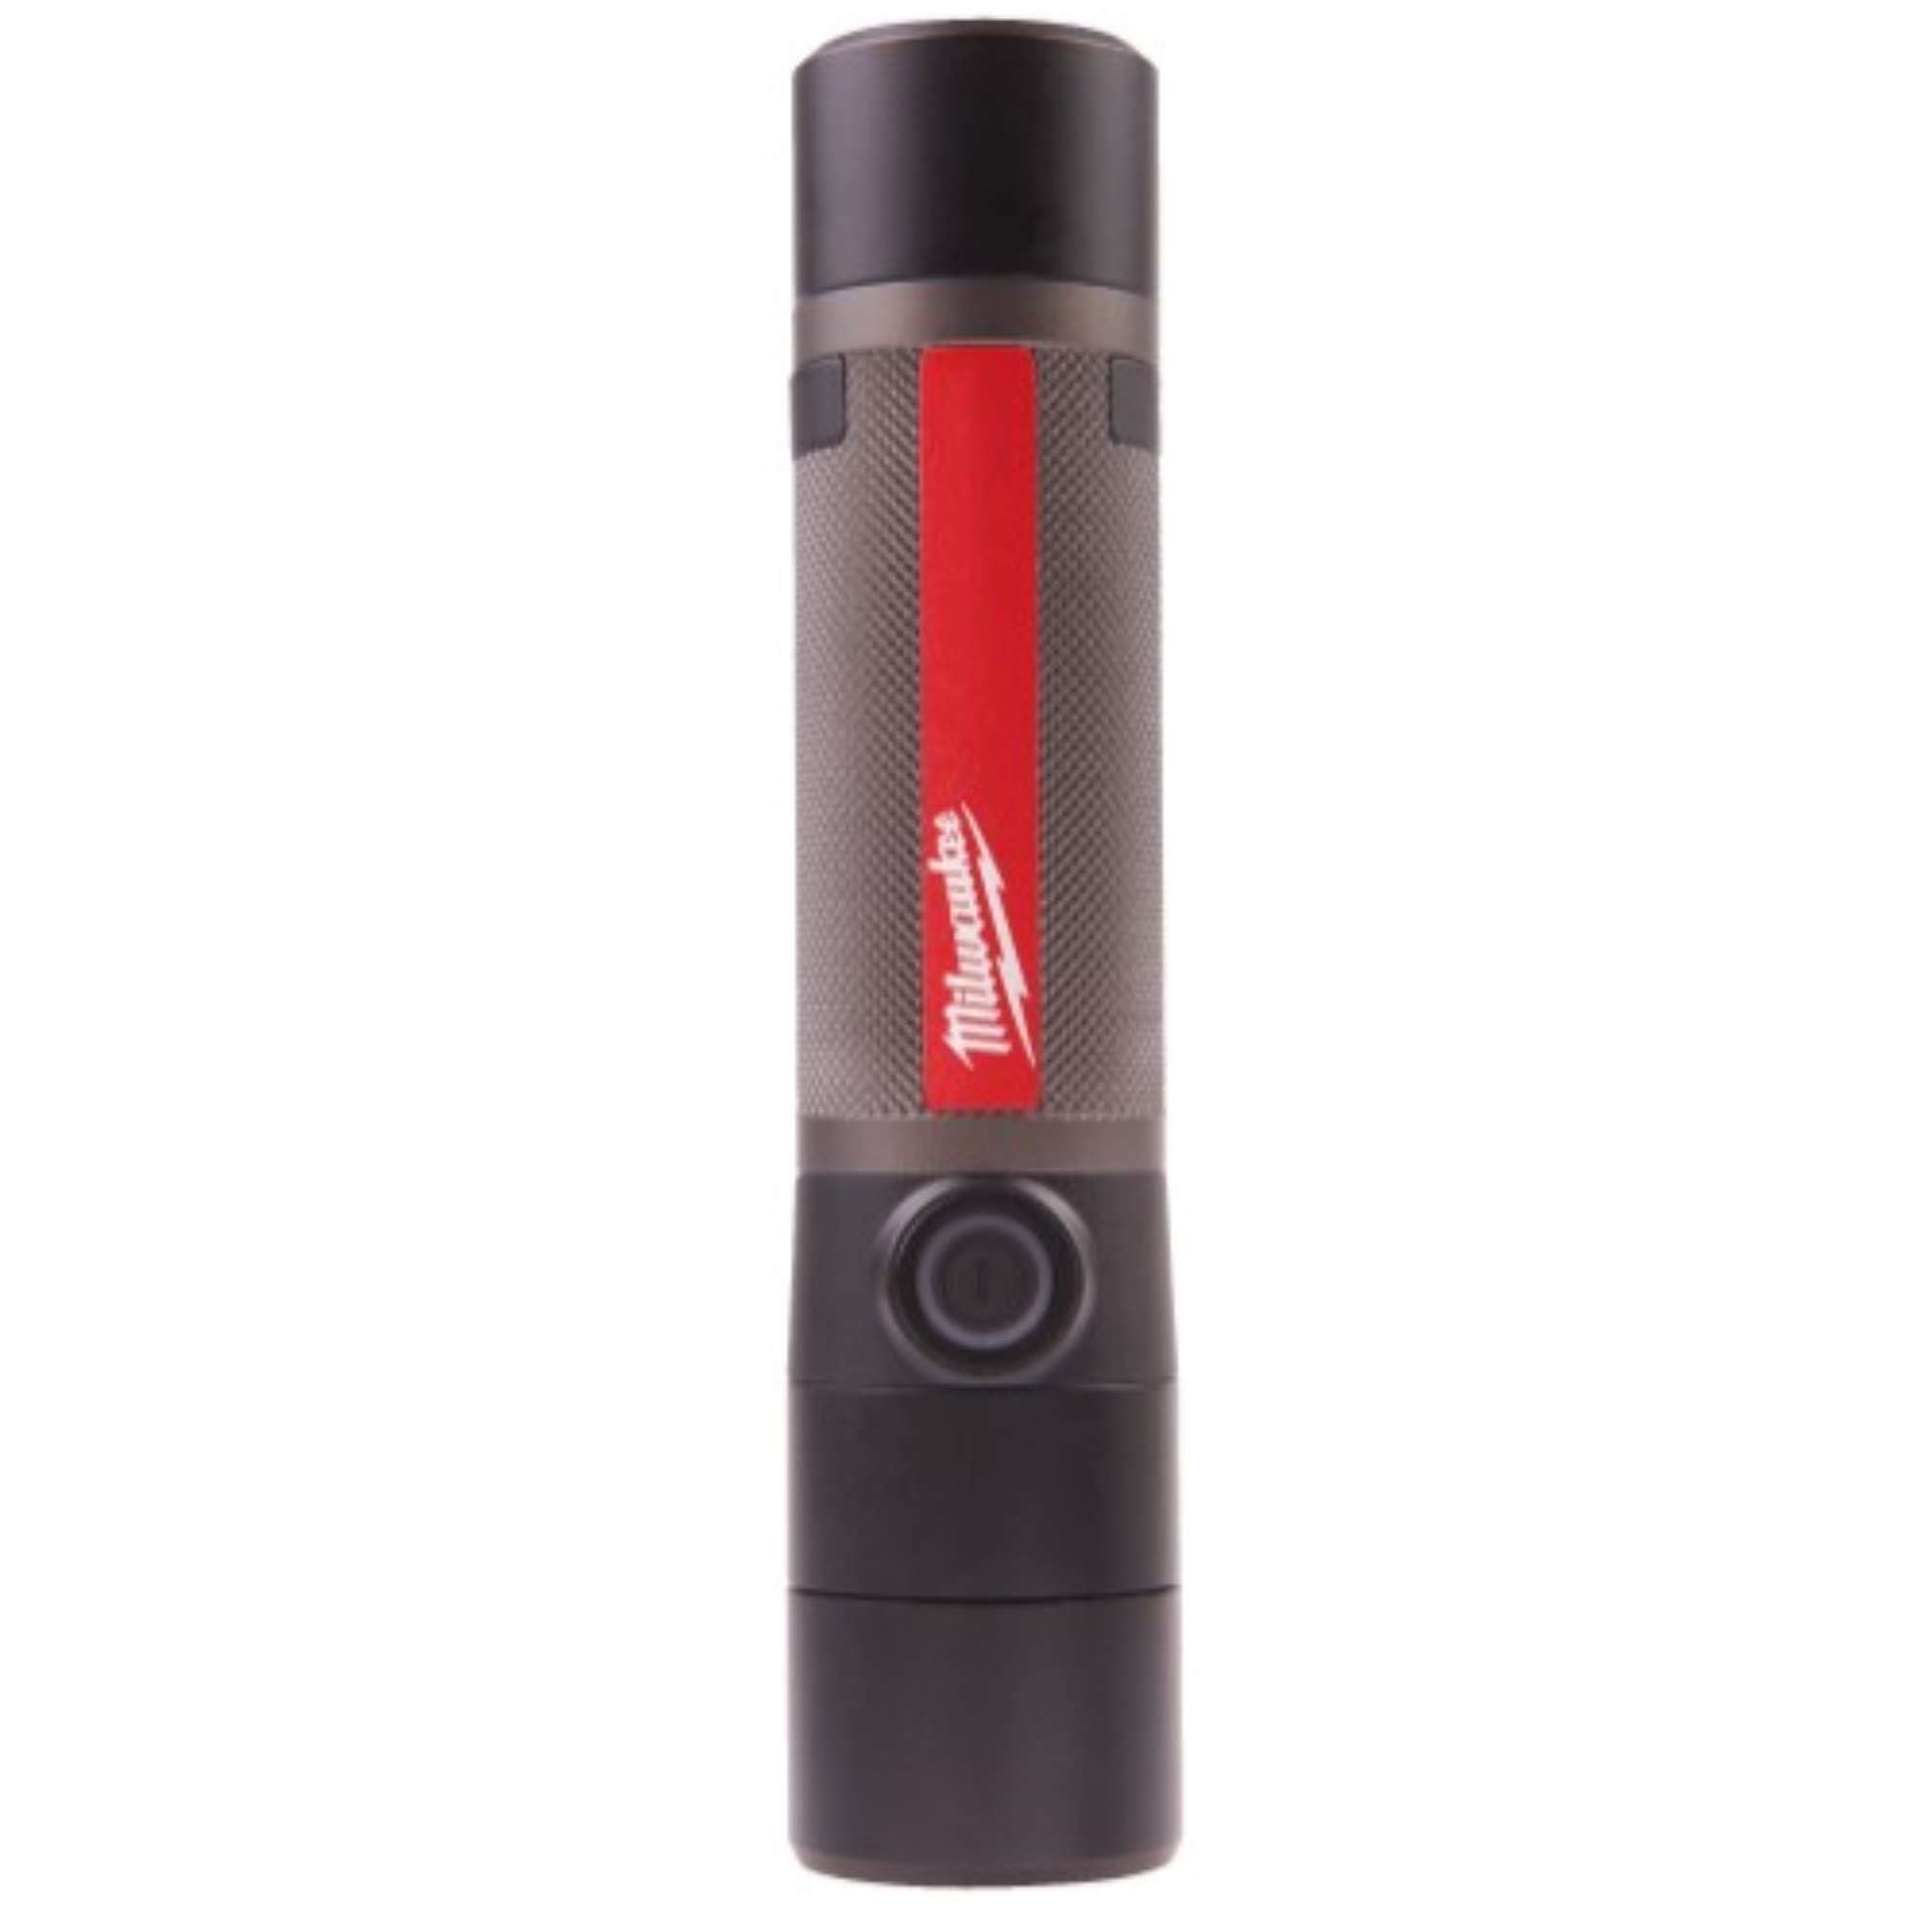 Compact Led Rechargeable Flashlight with USB 800 L IP67 - Milwaukee 4933478113